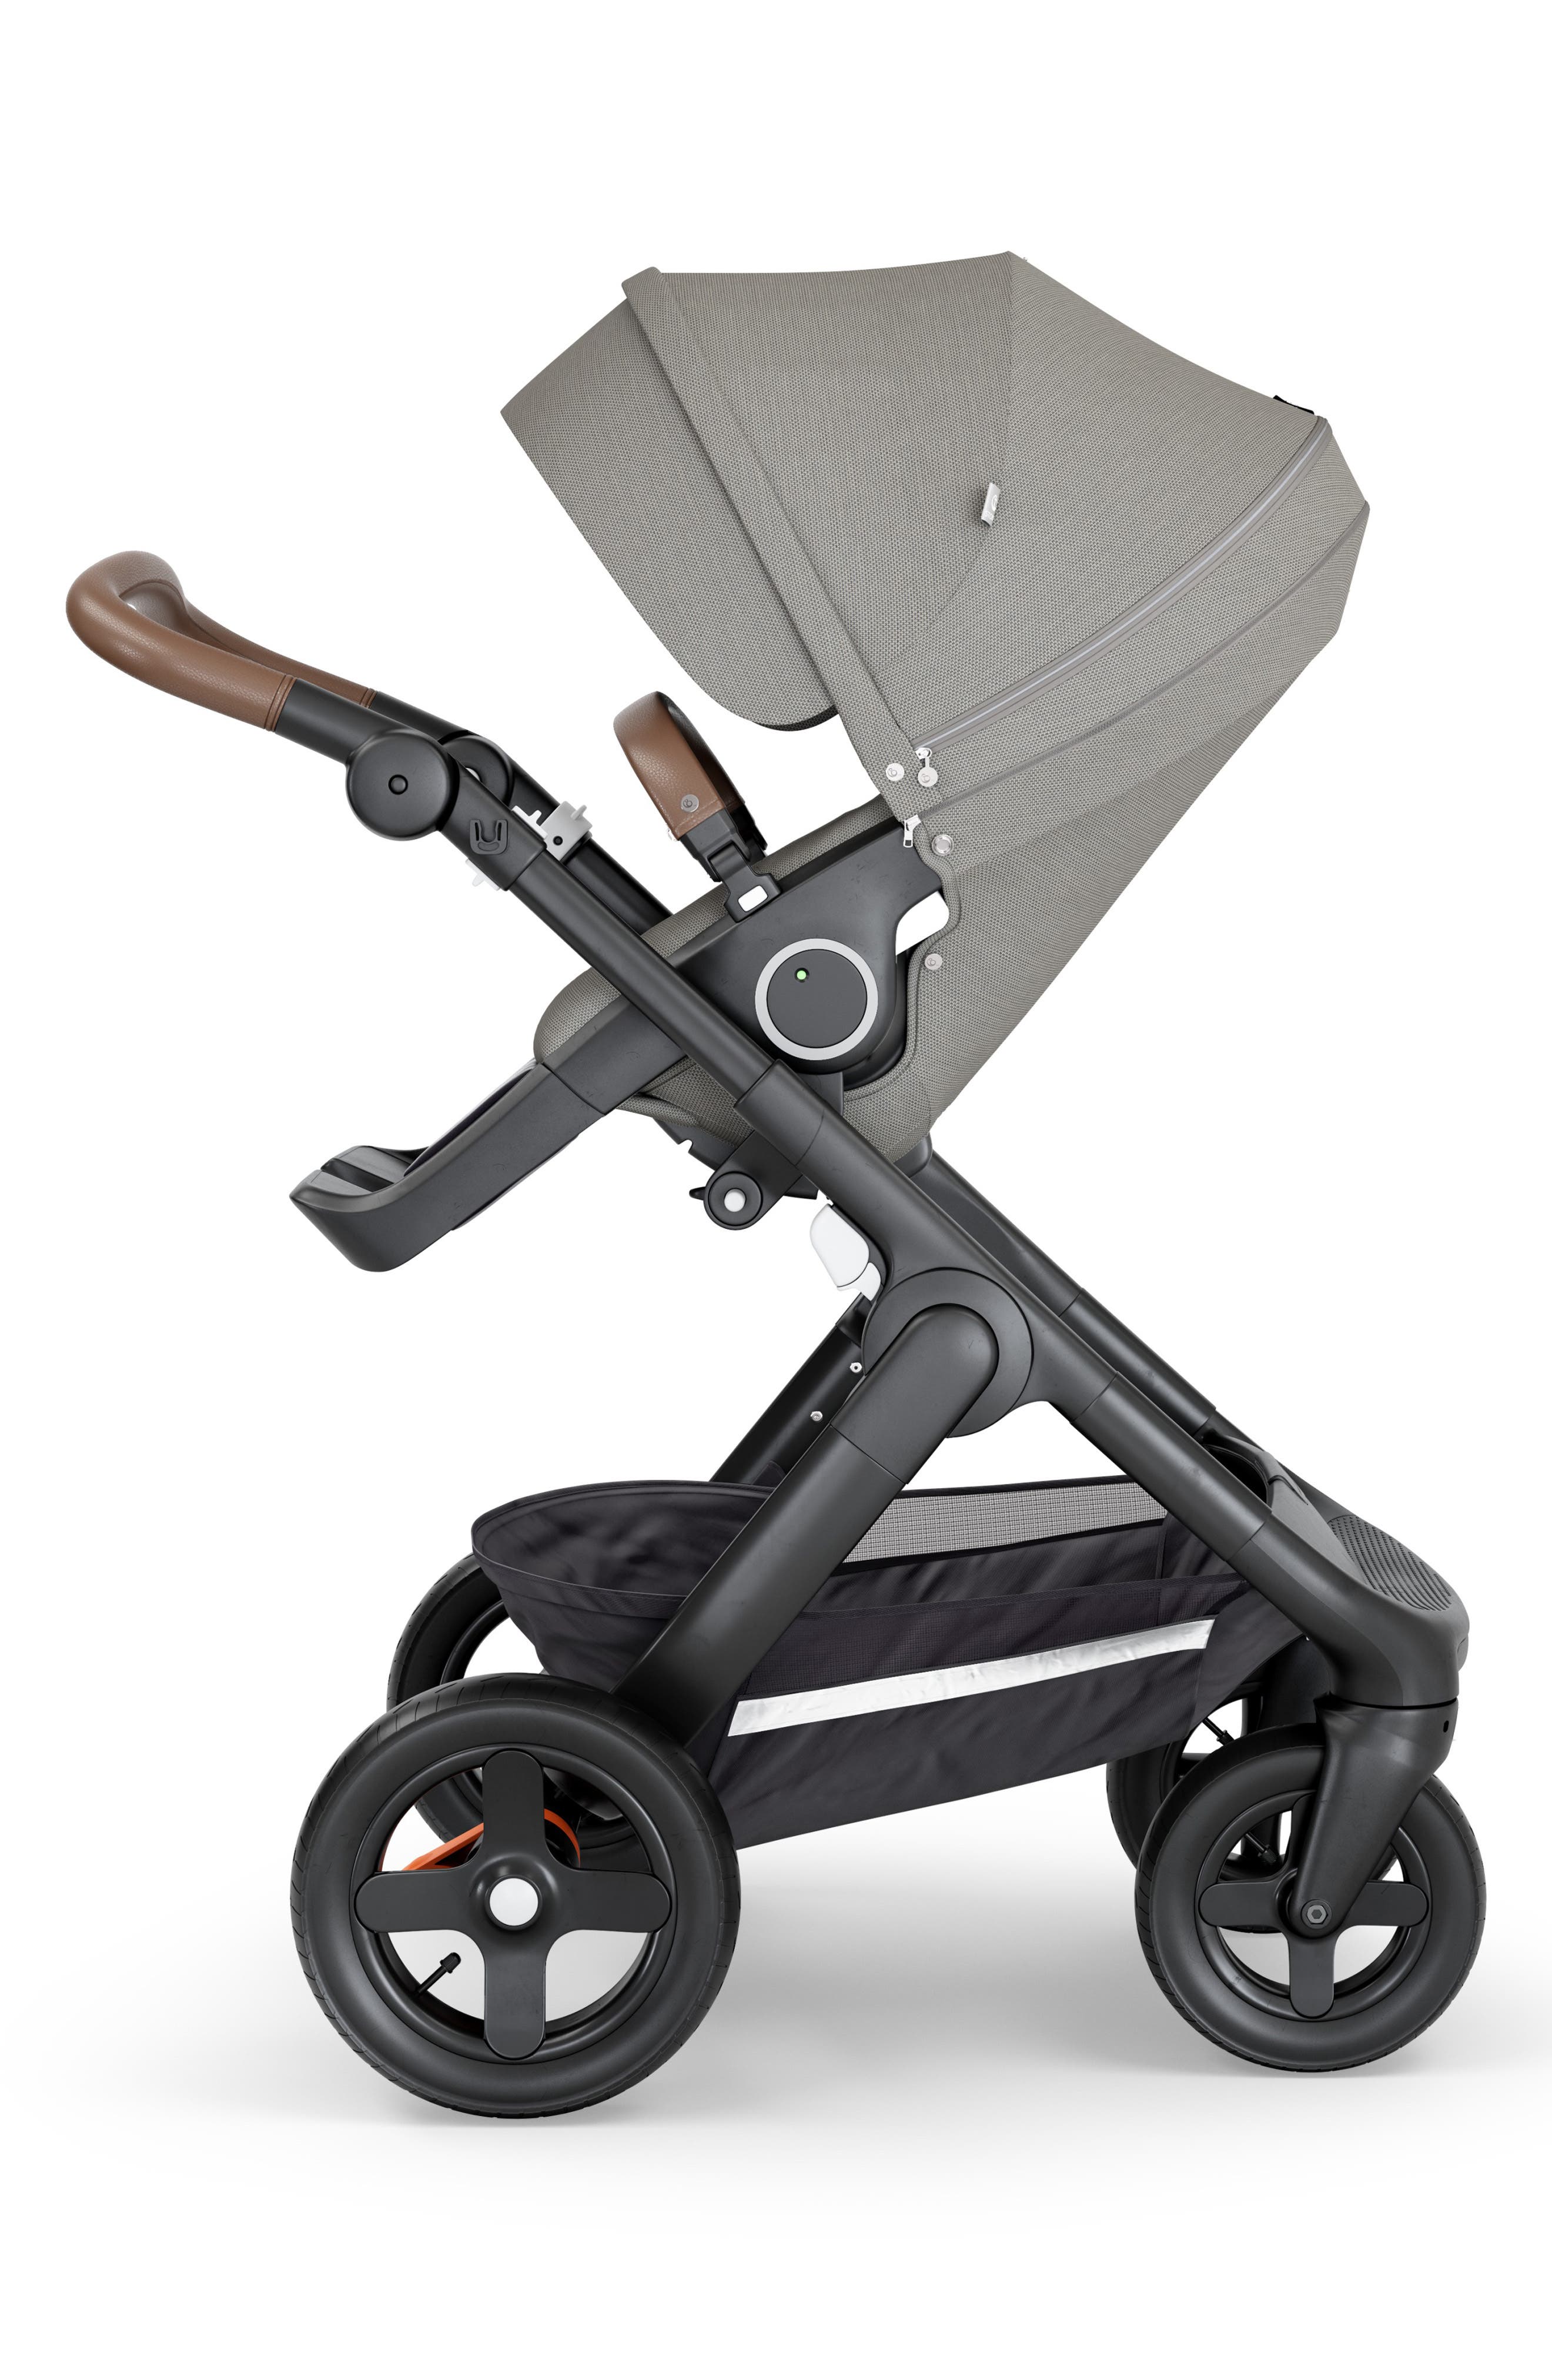 all leather stroller